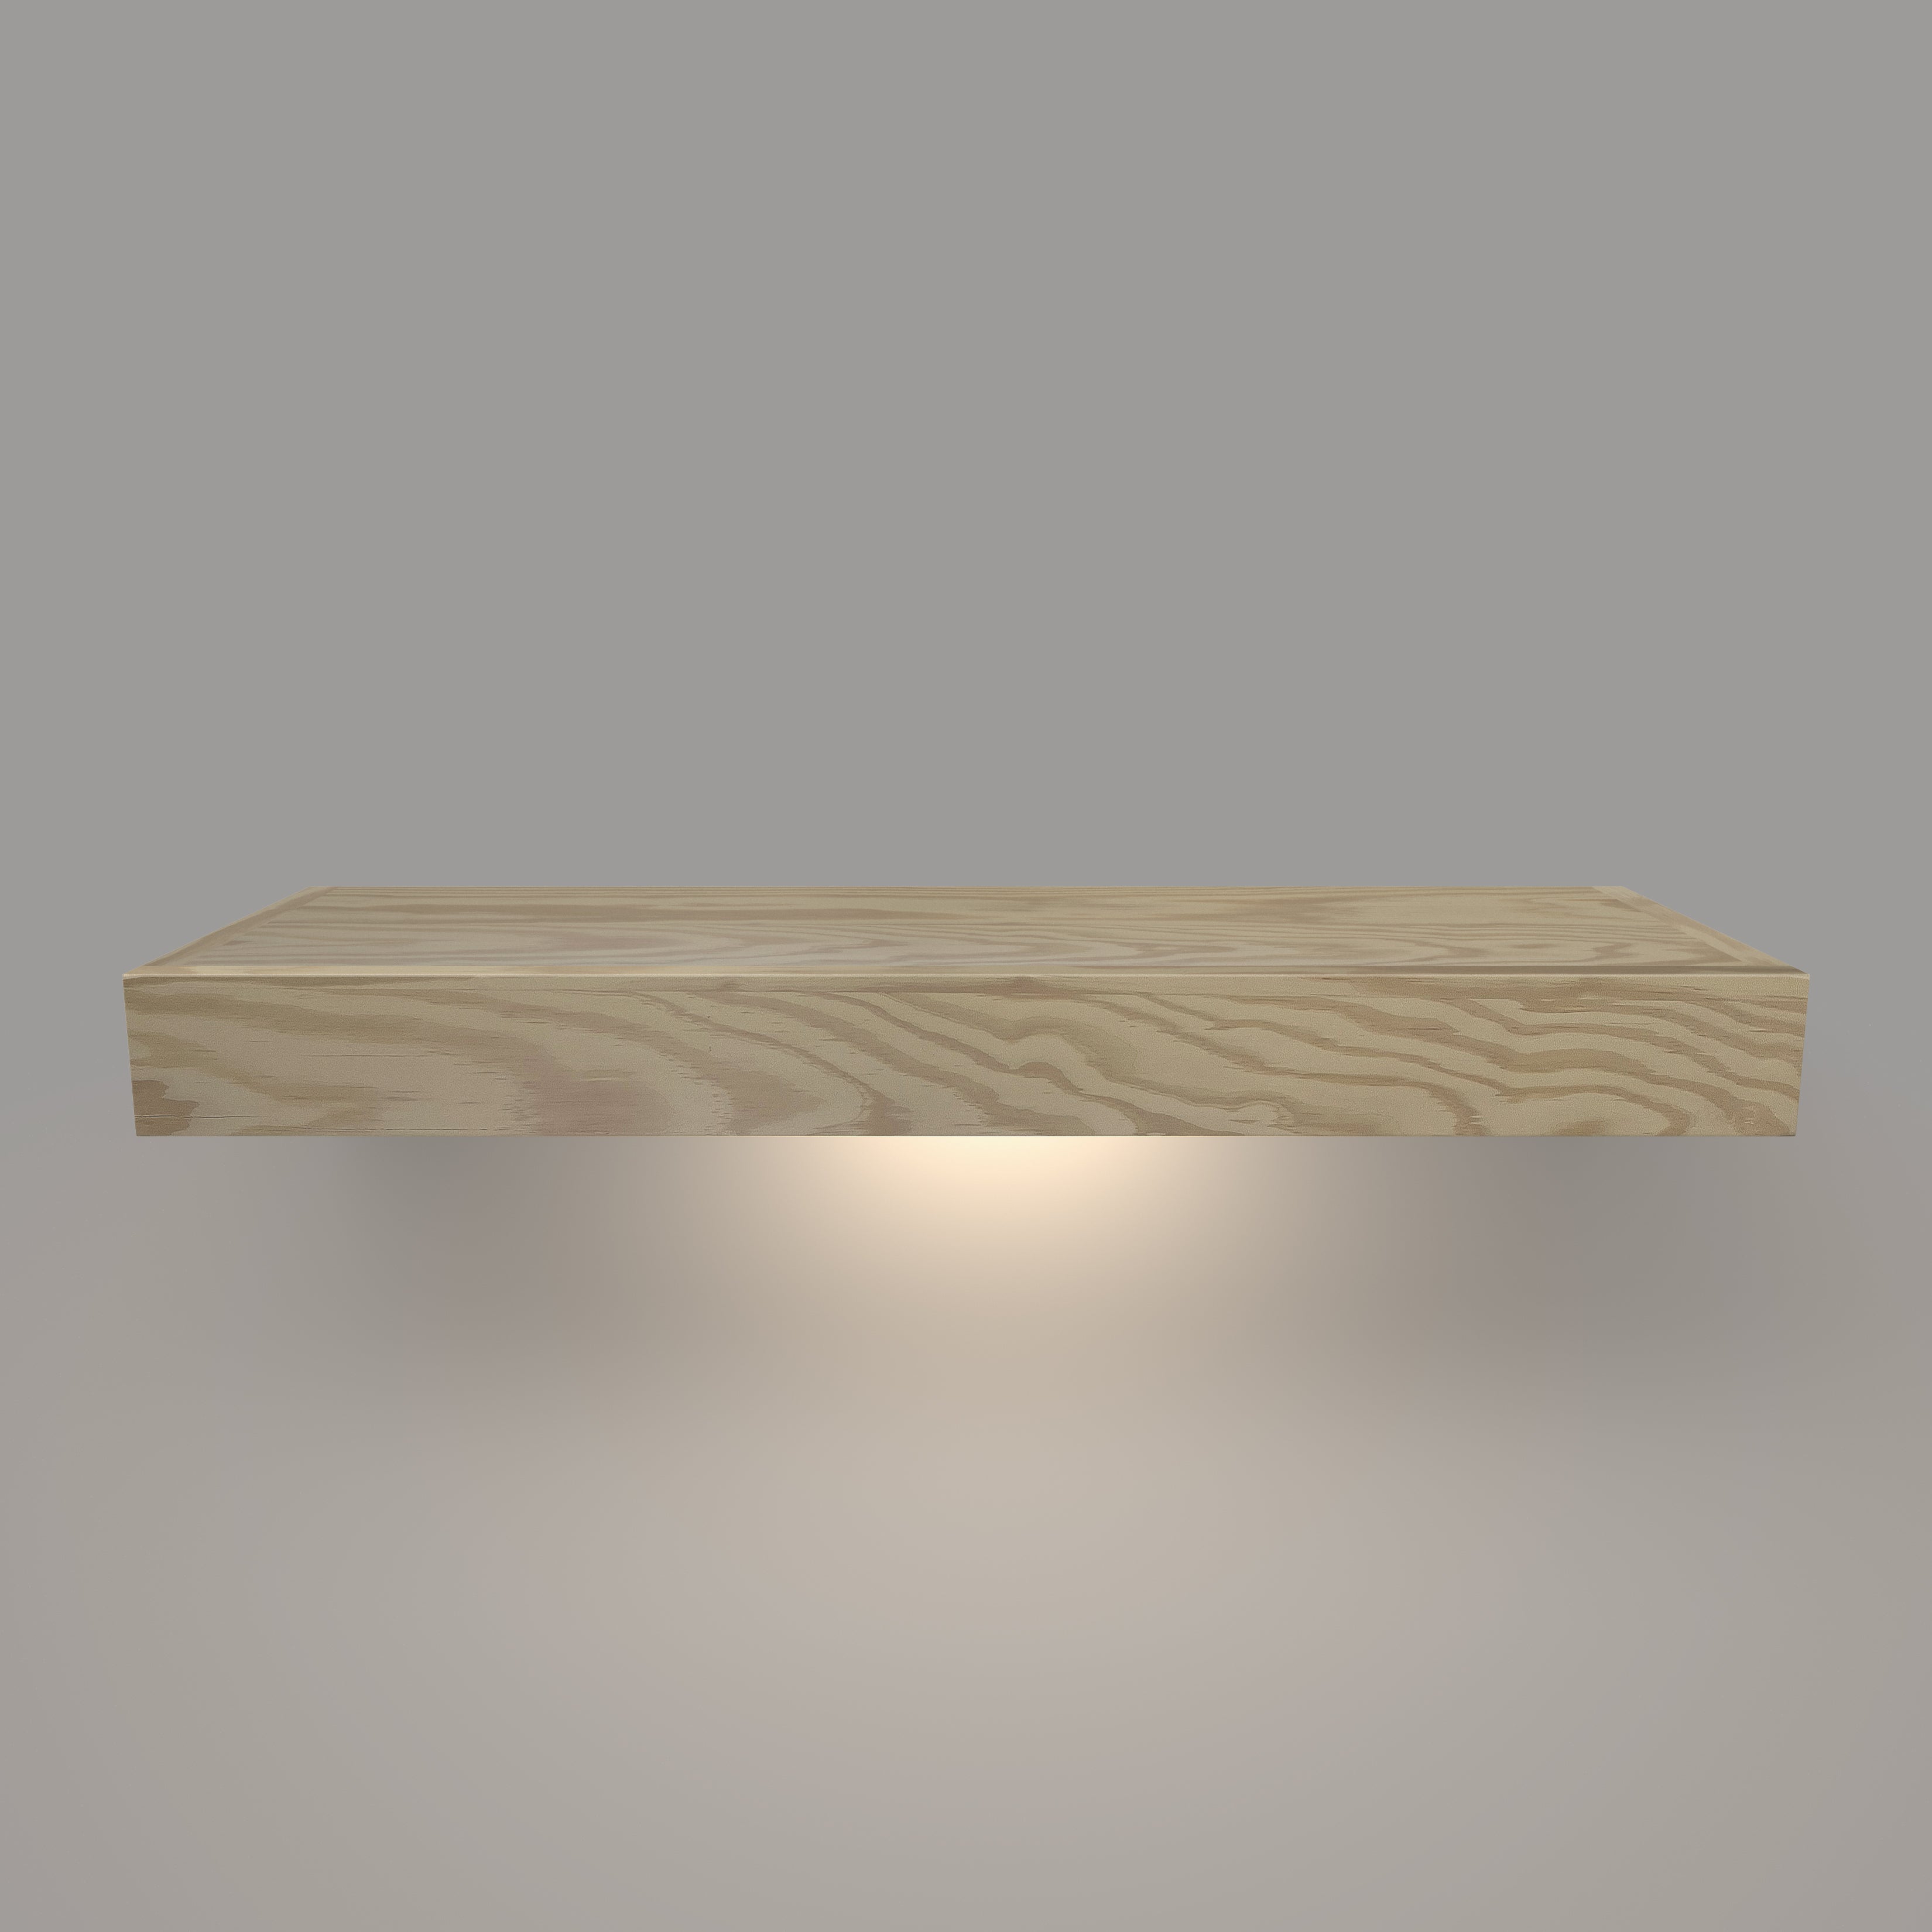 Pine 3 Inch Thick LED Lighted Floating Shelf - Battery